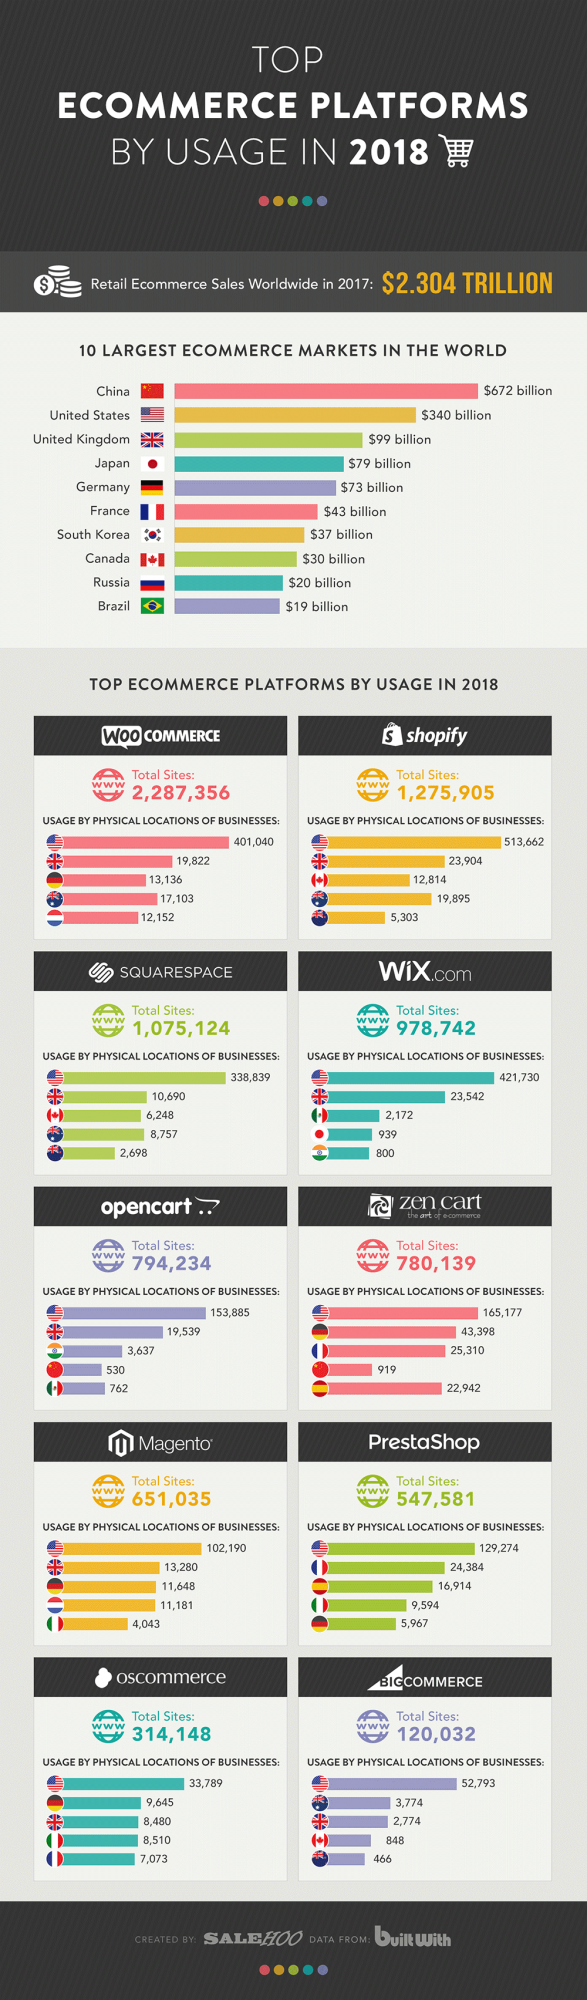 Top Ecommerce Platforms by Usage in 2018 (infographic)